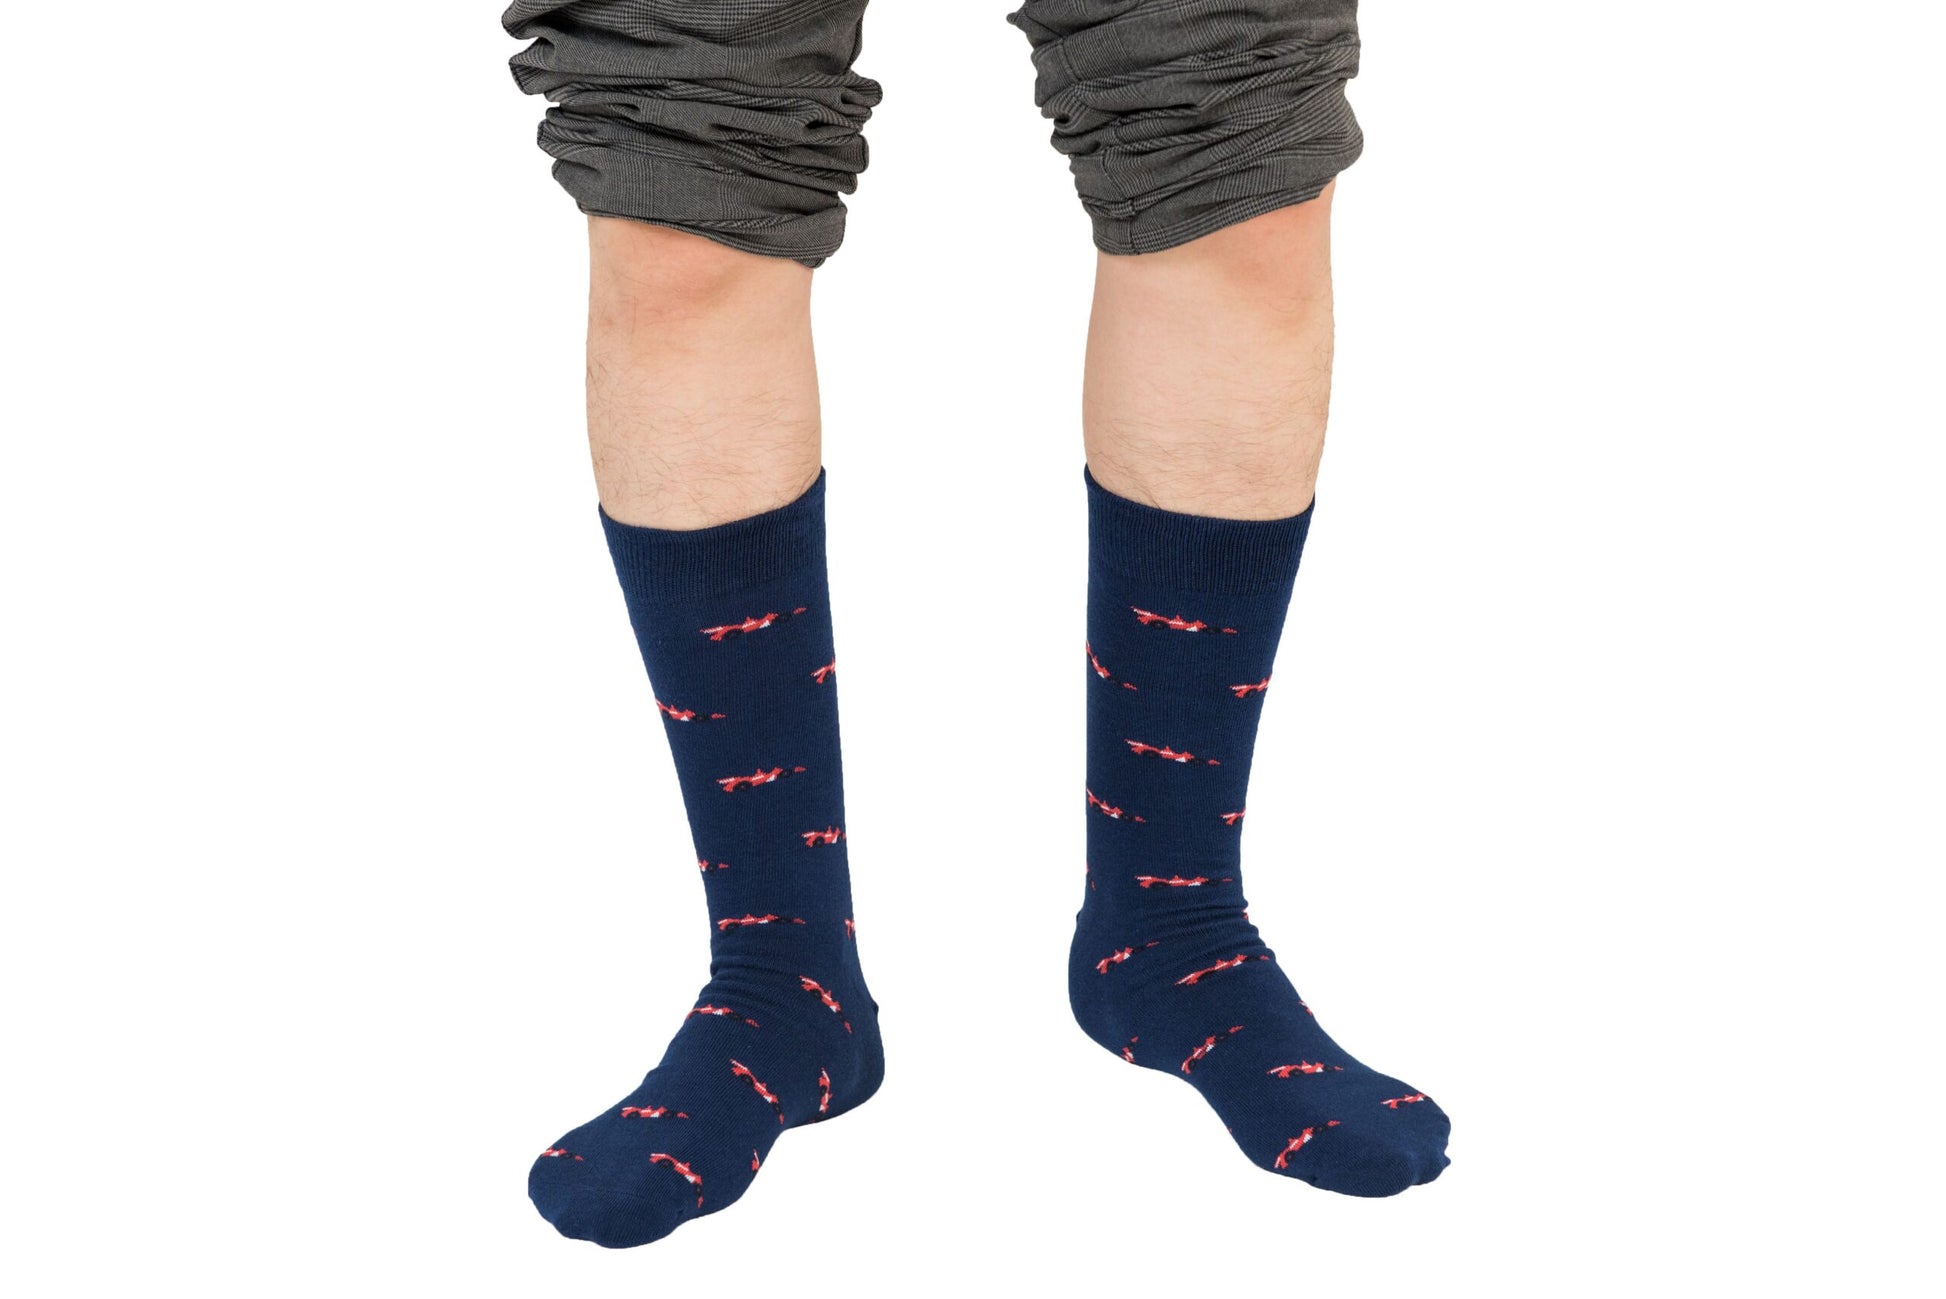 A boy wearing a pair of Racing Car Socks with an accelerated red bow on them, showcasing his impressive sock game.